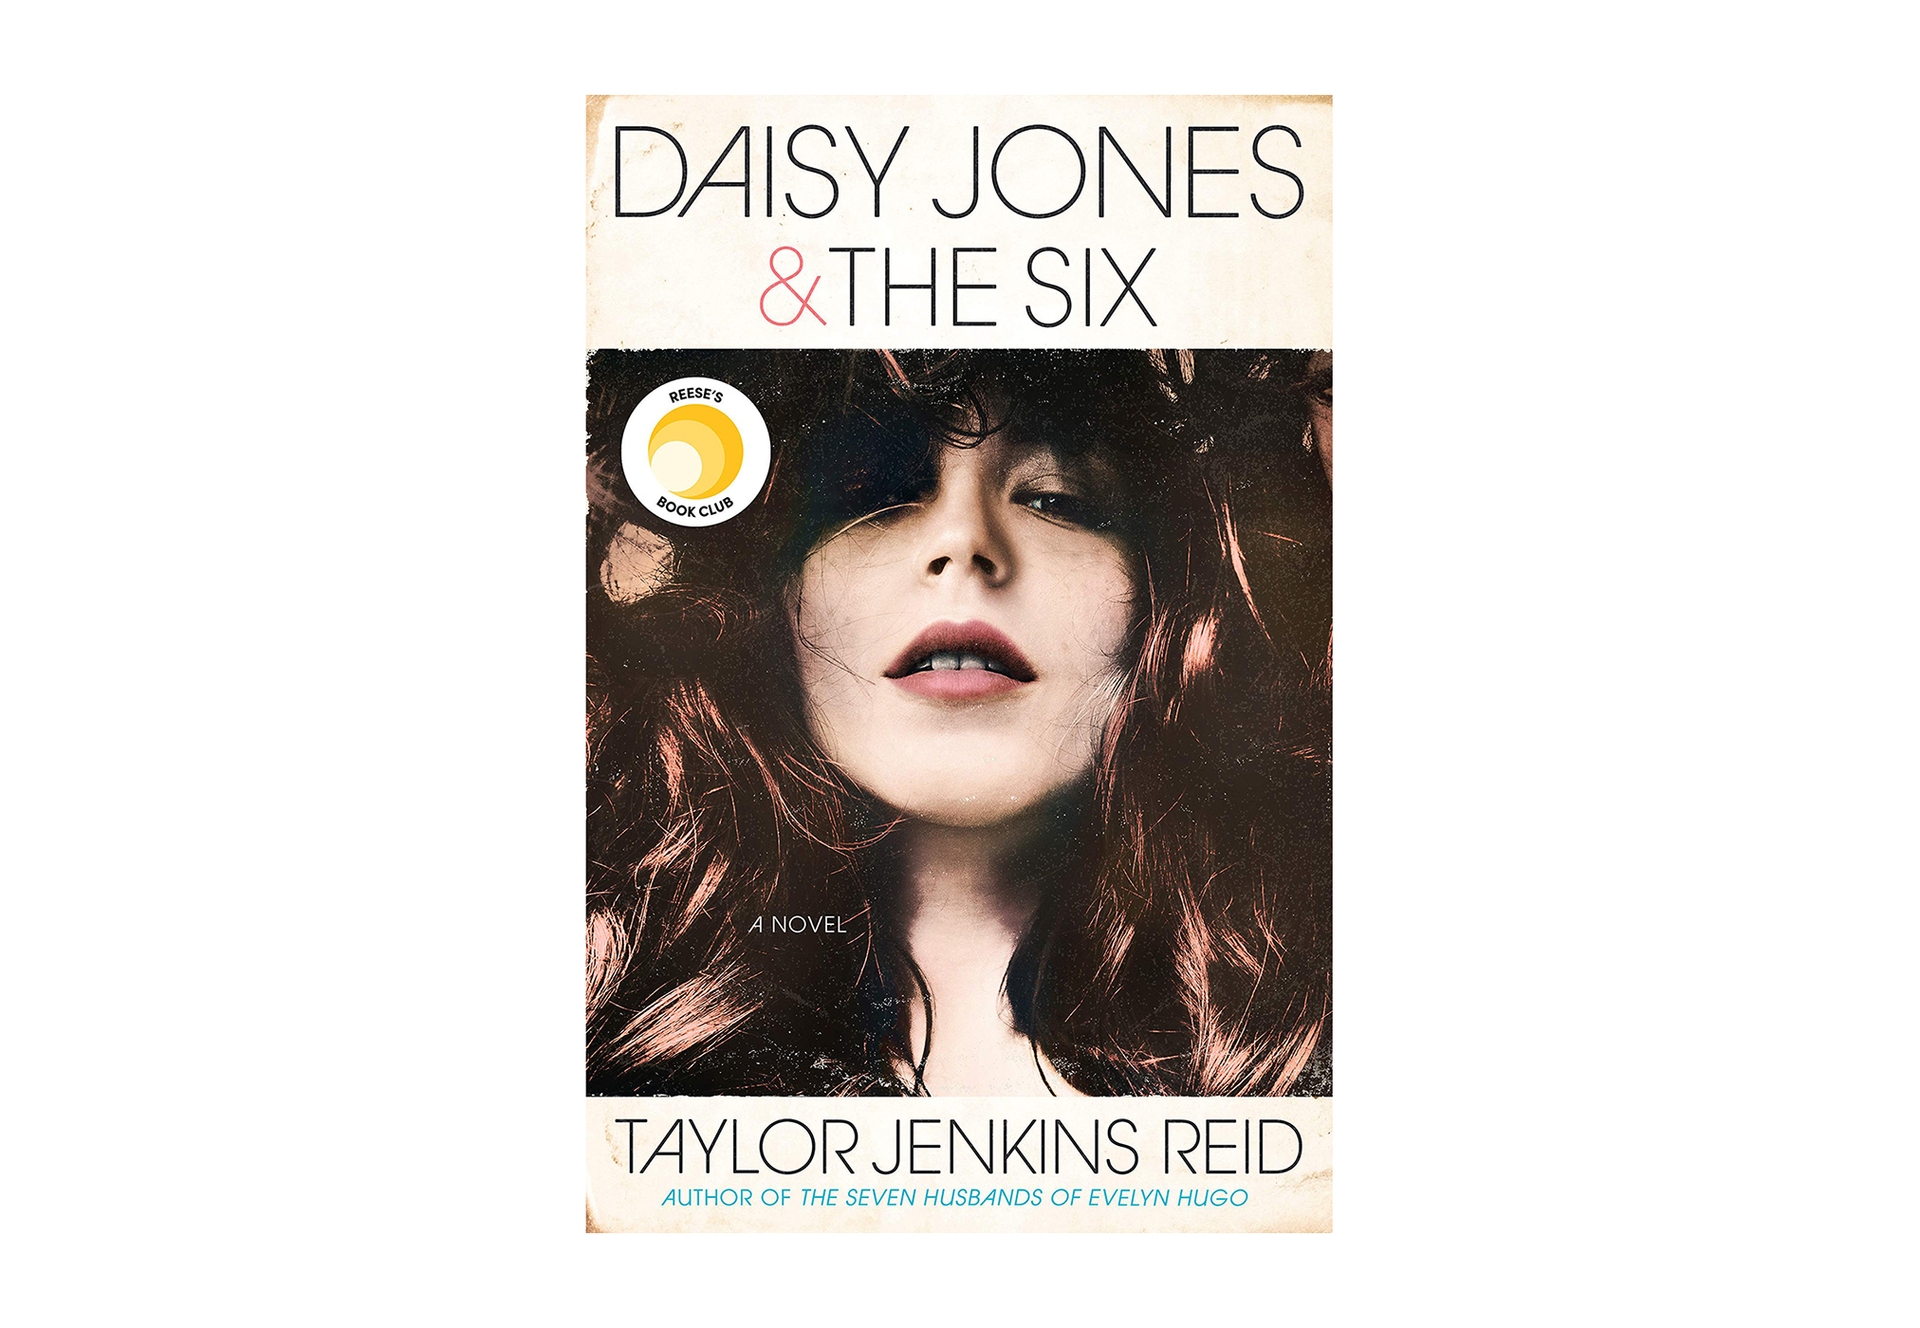 A book cover for "Daisy Jones & the six," a novel by Taylor Jenkins Reid shows a young woman with long dark hair looking downward into the camera. The book background is an age-stained ivory, with all-caps font for the title and author's name.